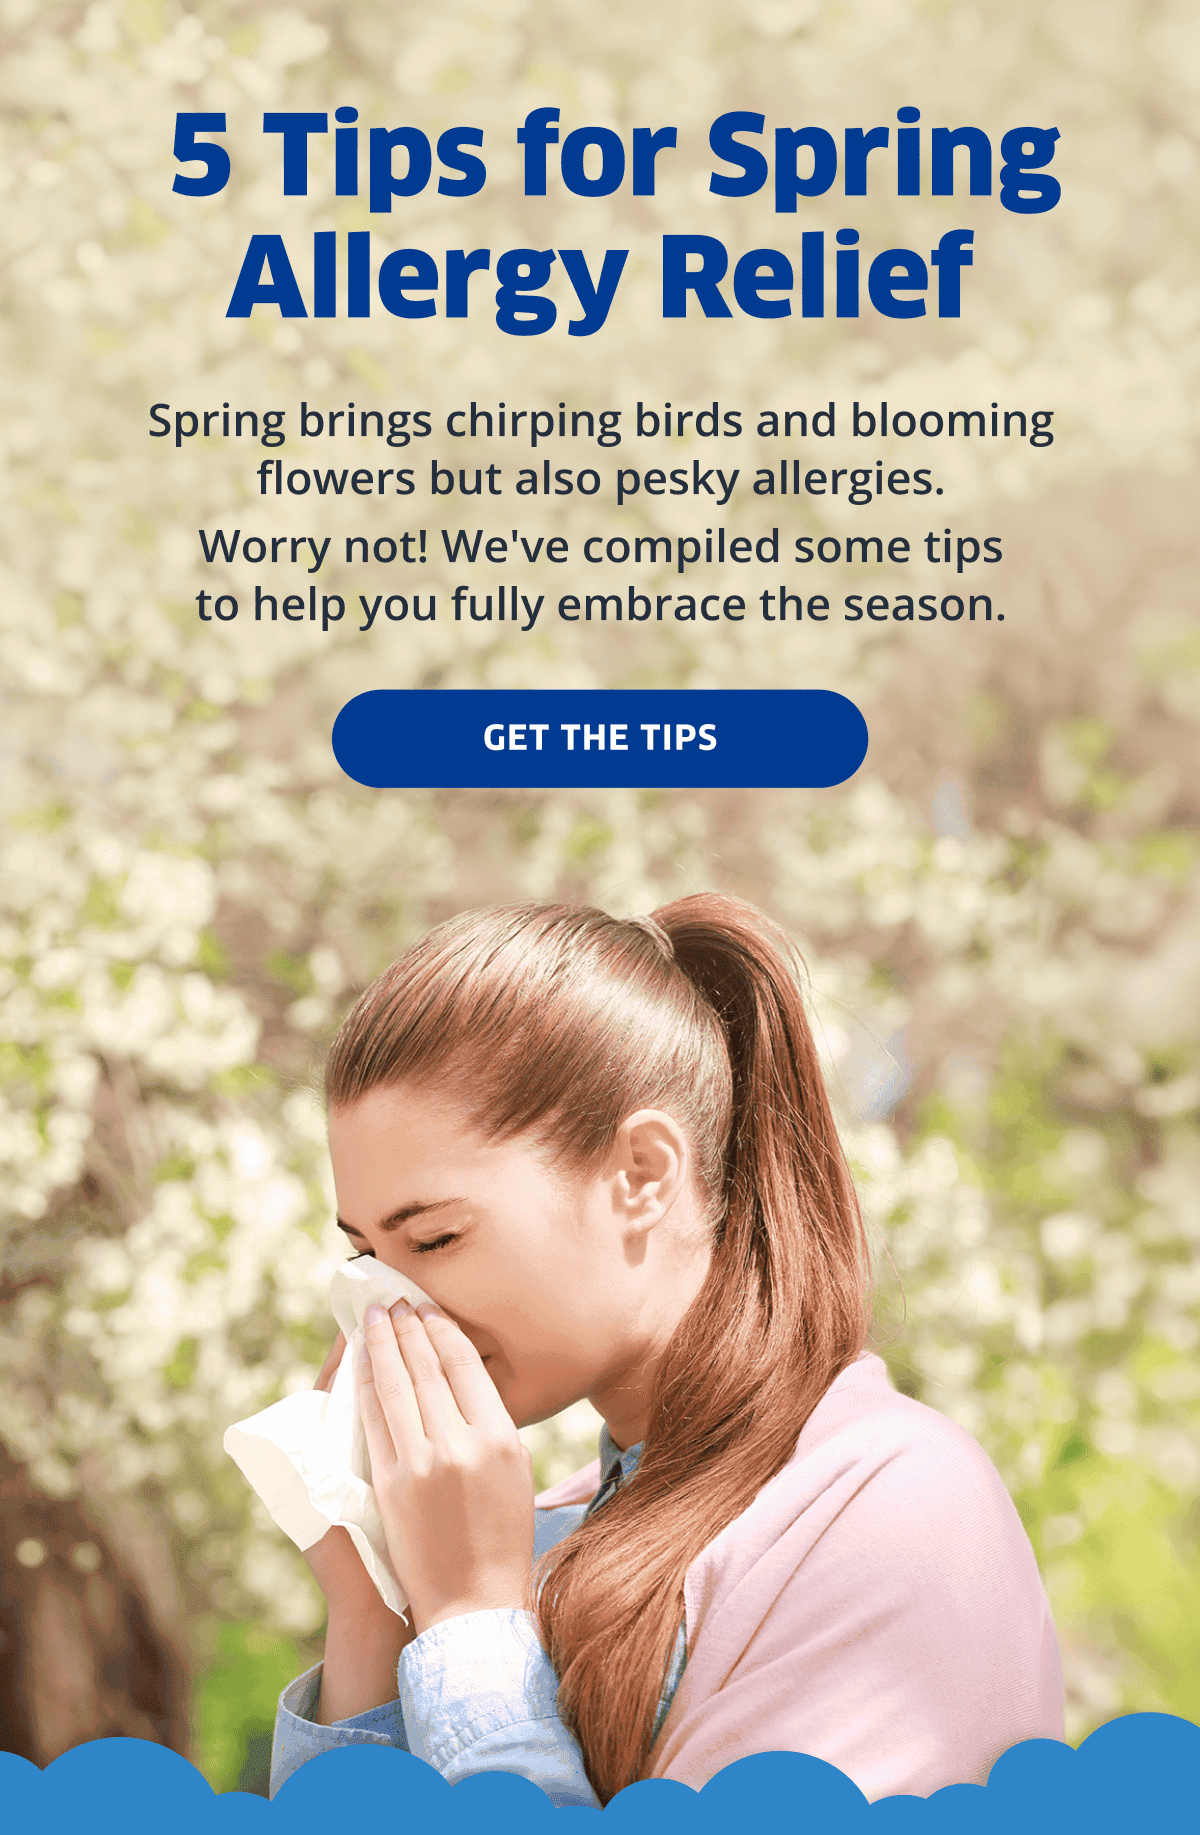 5 Tips for Spring Allergy Relief | Get The Tips